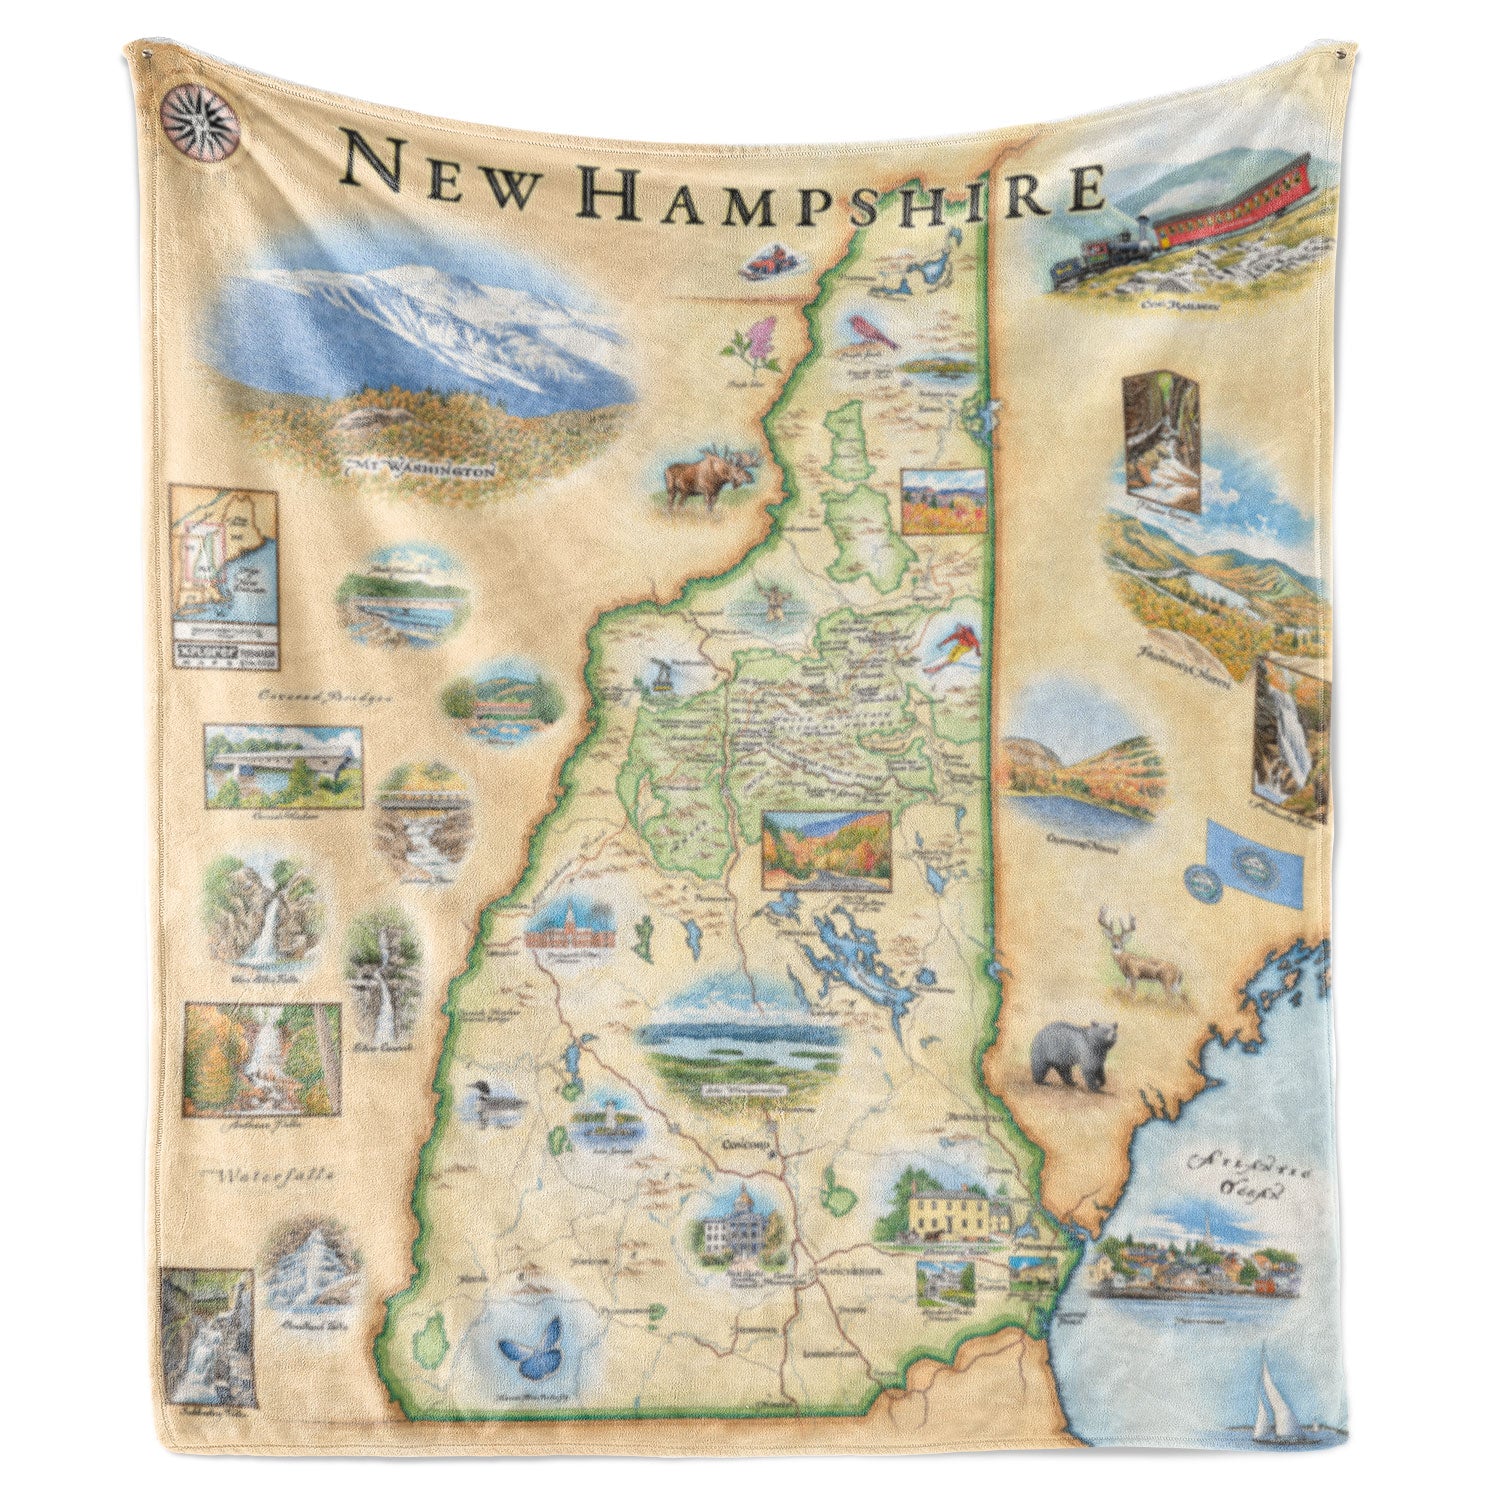 Hanging fleece blanket with map of New Hampshire on it. Artistic map blanket. Measures 58